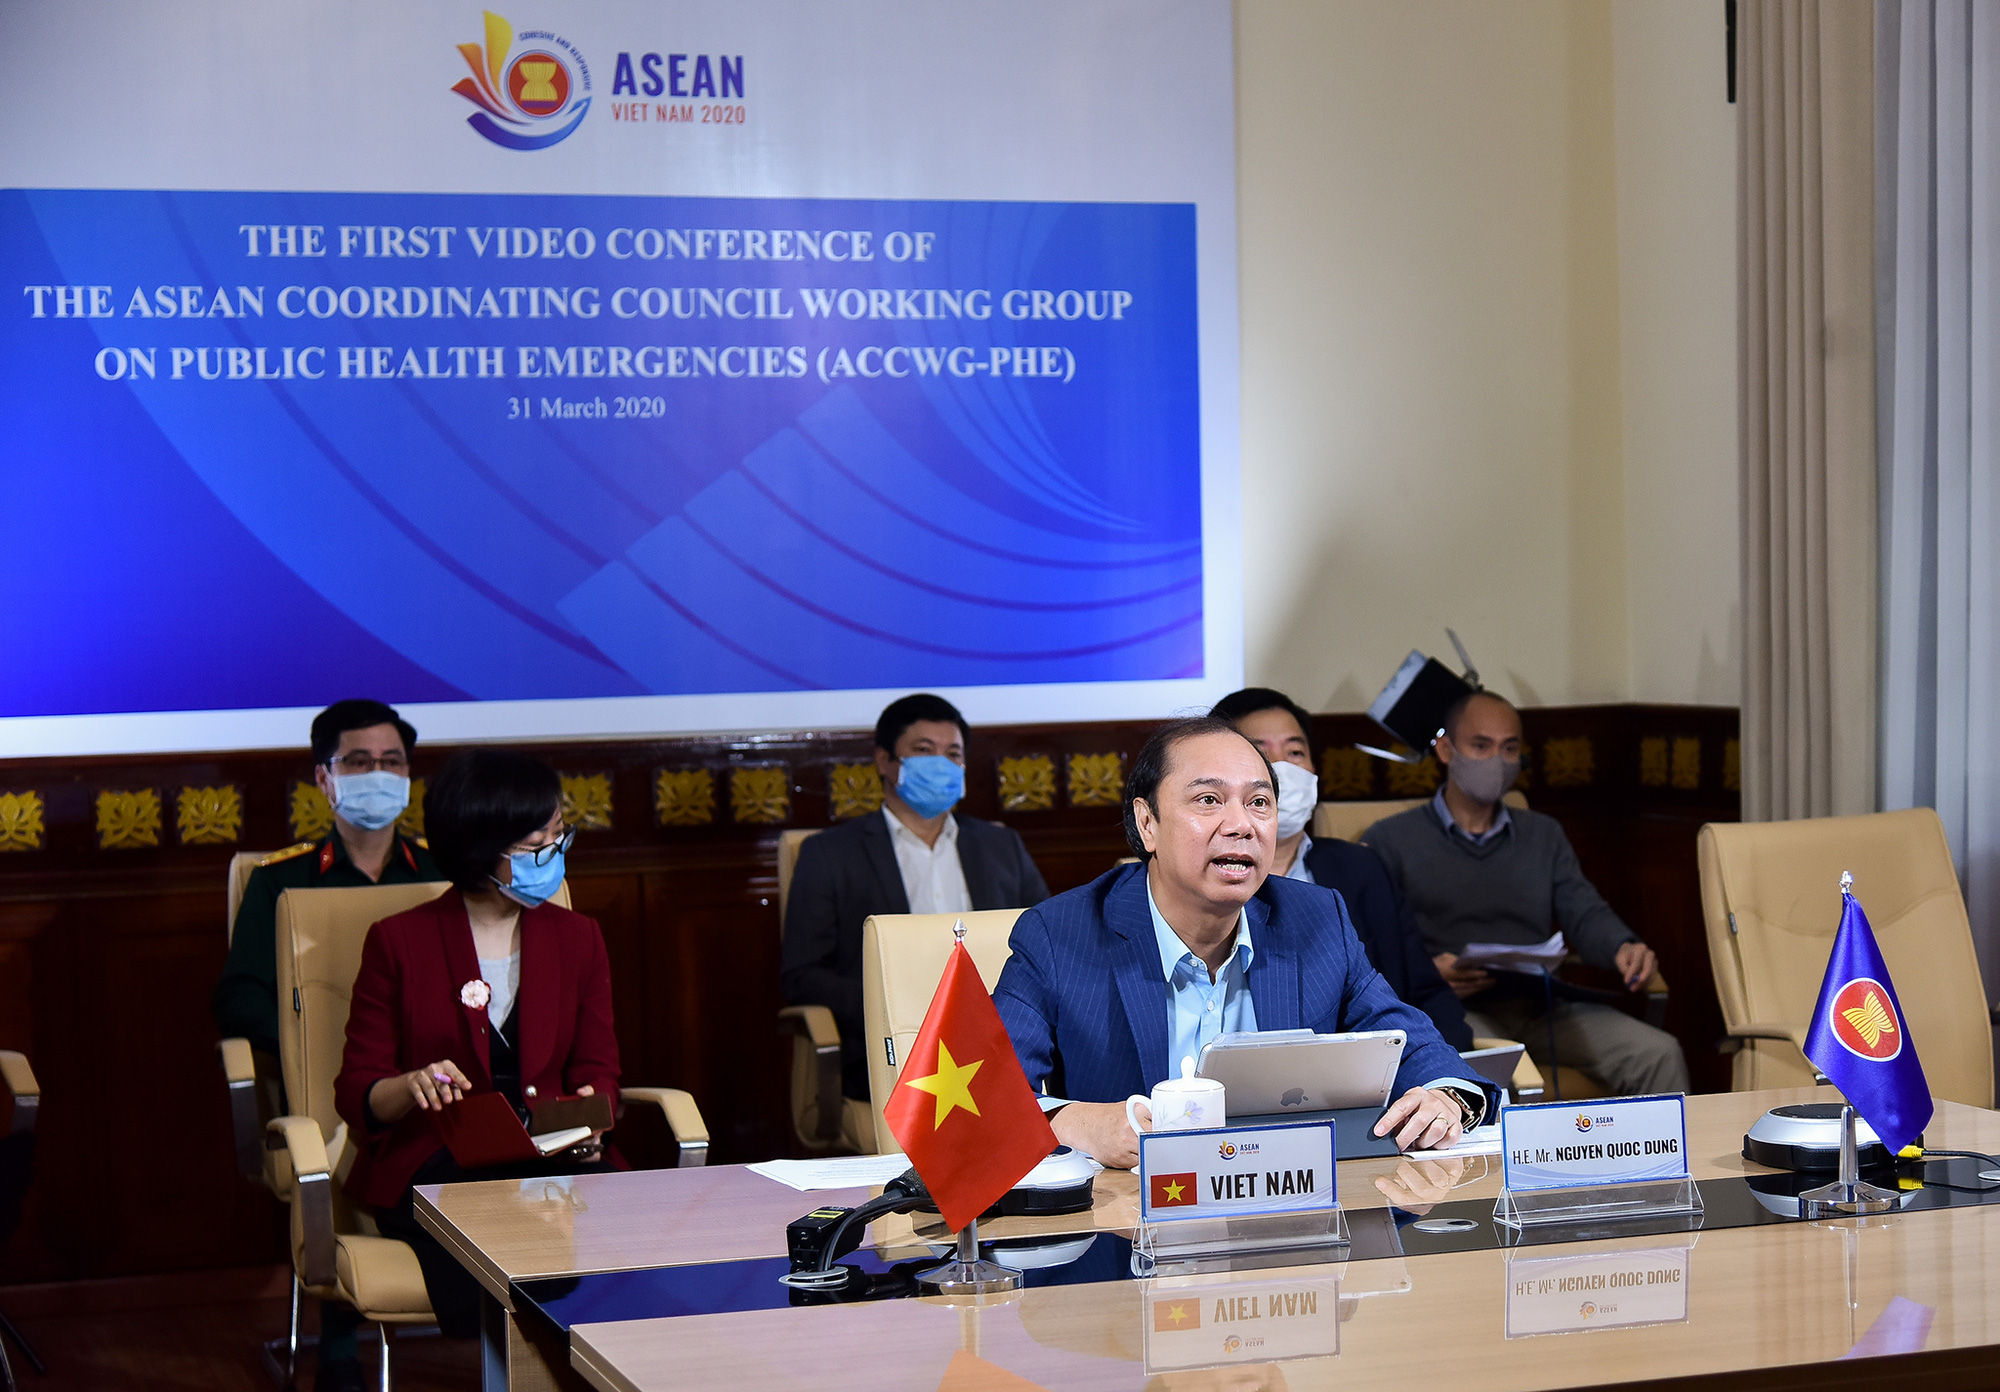 ASEAN pledges to keep market open amid COVID-19 pandemic